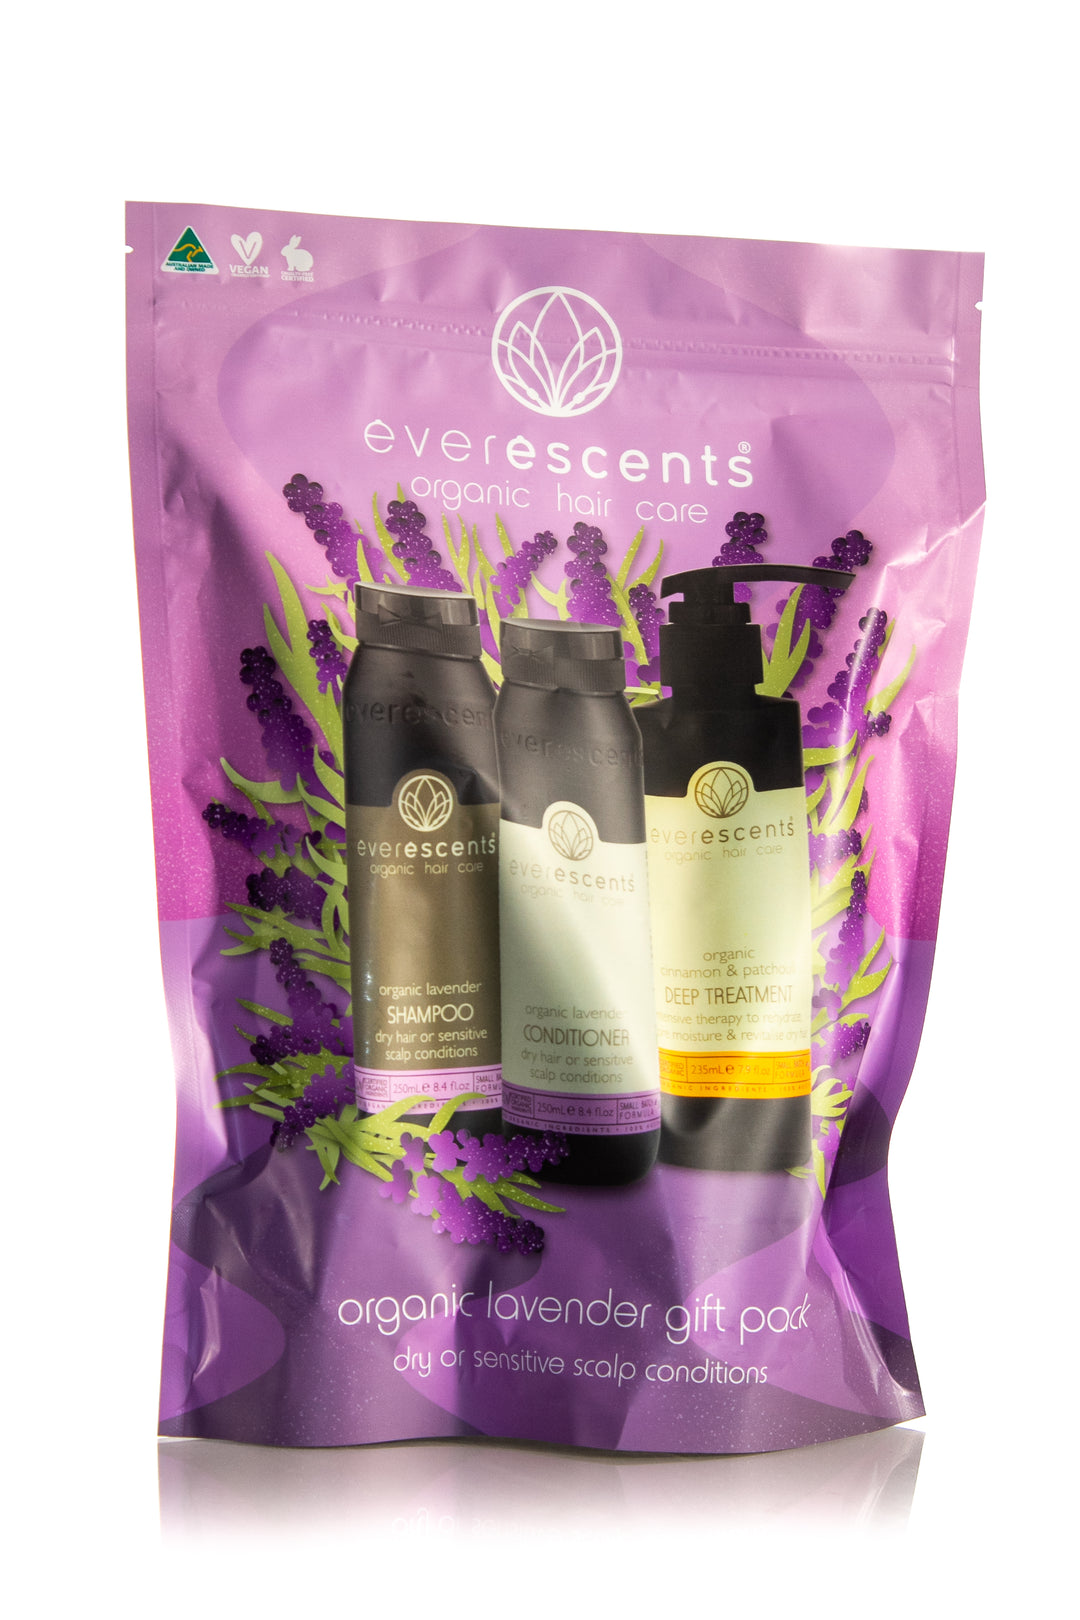 Everescents Organic Lavender Gift Pack